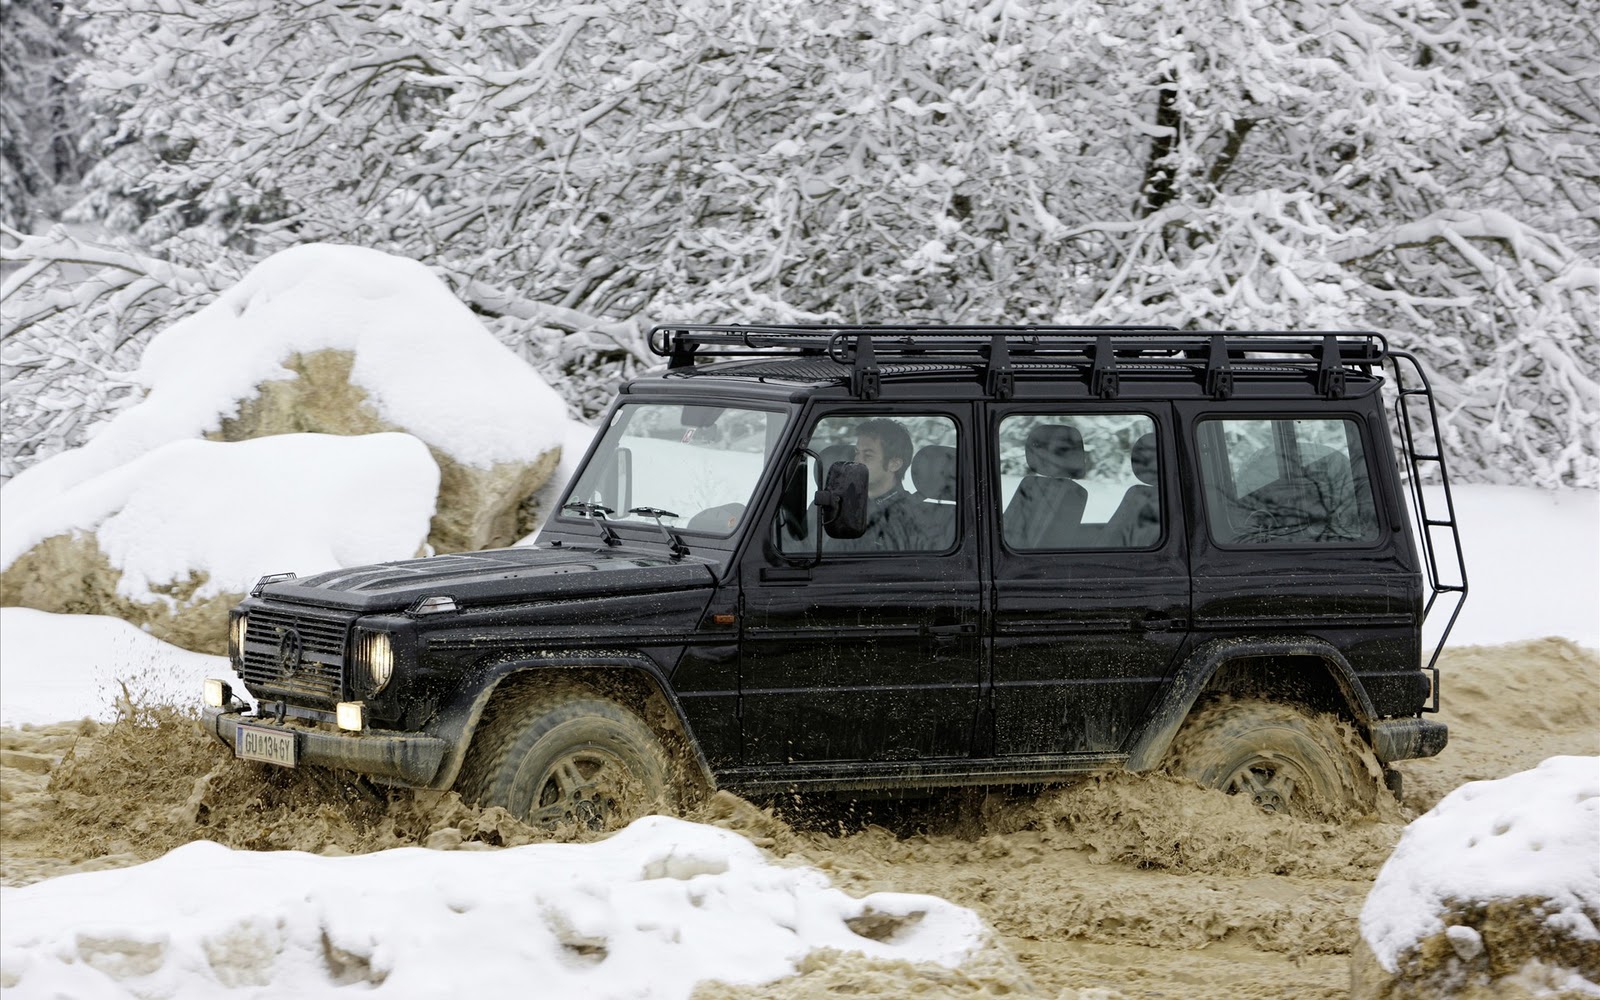 With locking differentials, a hood you can jump up and down on, short overhangs, and plenty of interior space, the G-Wagen is an unstoppable utility. Now you can afford to keep one in fuel as well.